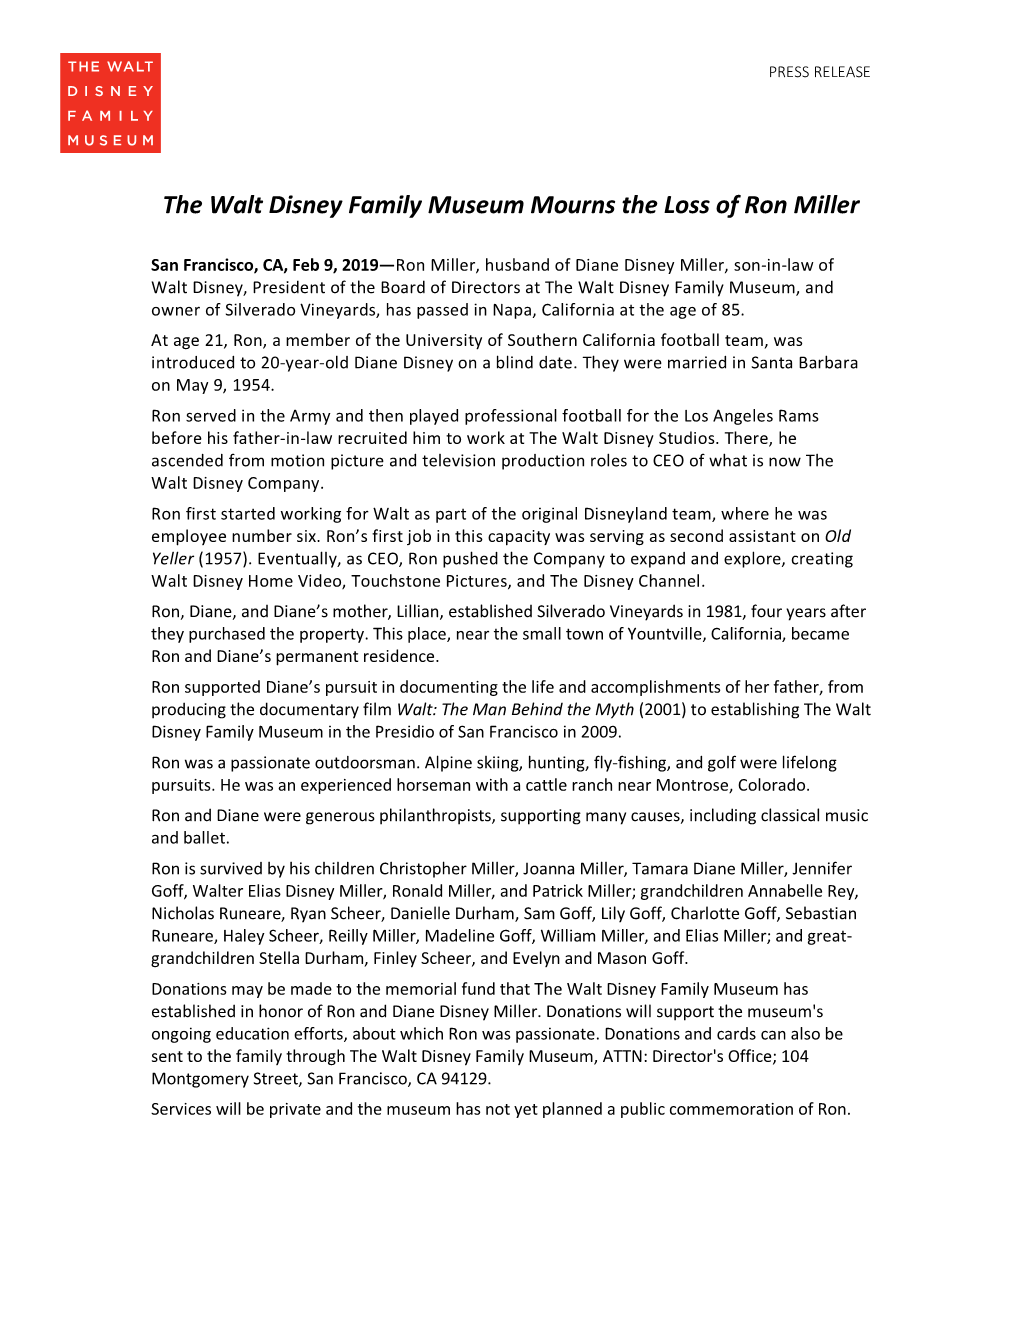 The Walt Disney Family Museum Mourns the Loss of Ron Miller